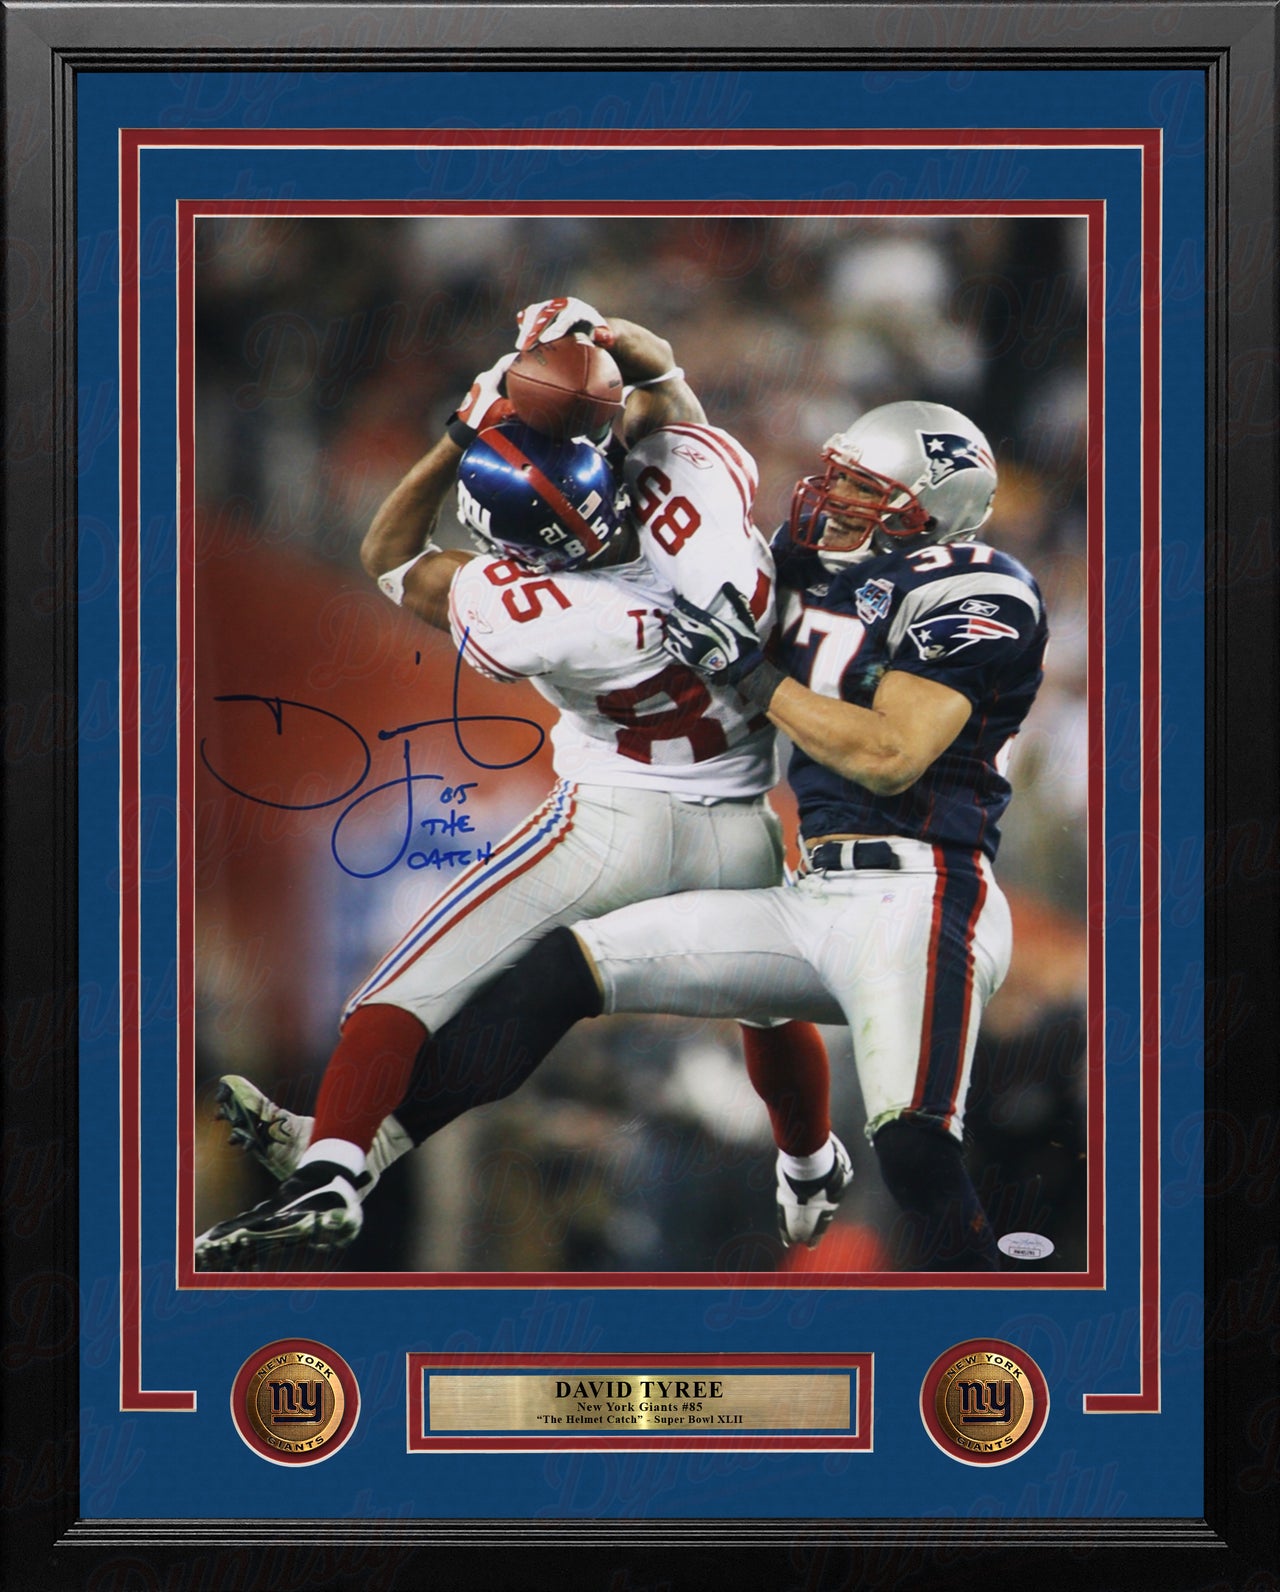 David Tyree Super Bowl Helmet Catch NY Giants Autographed 16x20 Framed Photo Inscribed The Catch